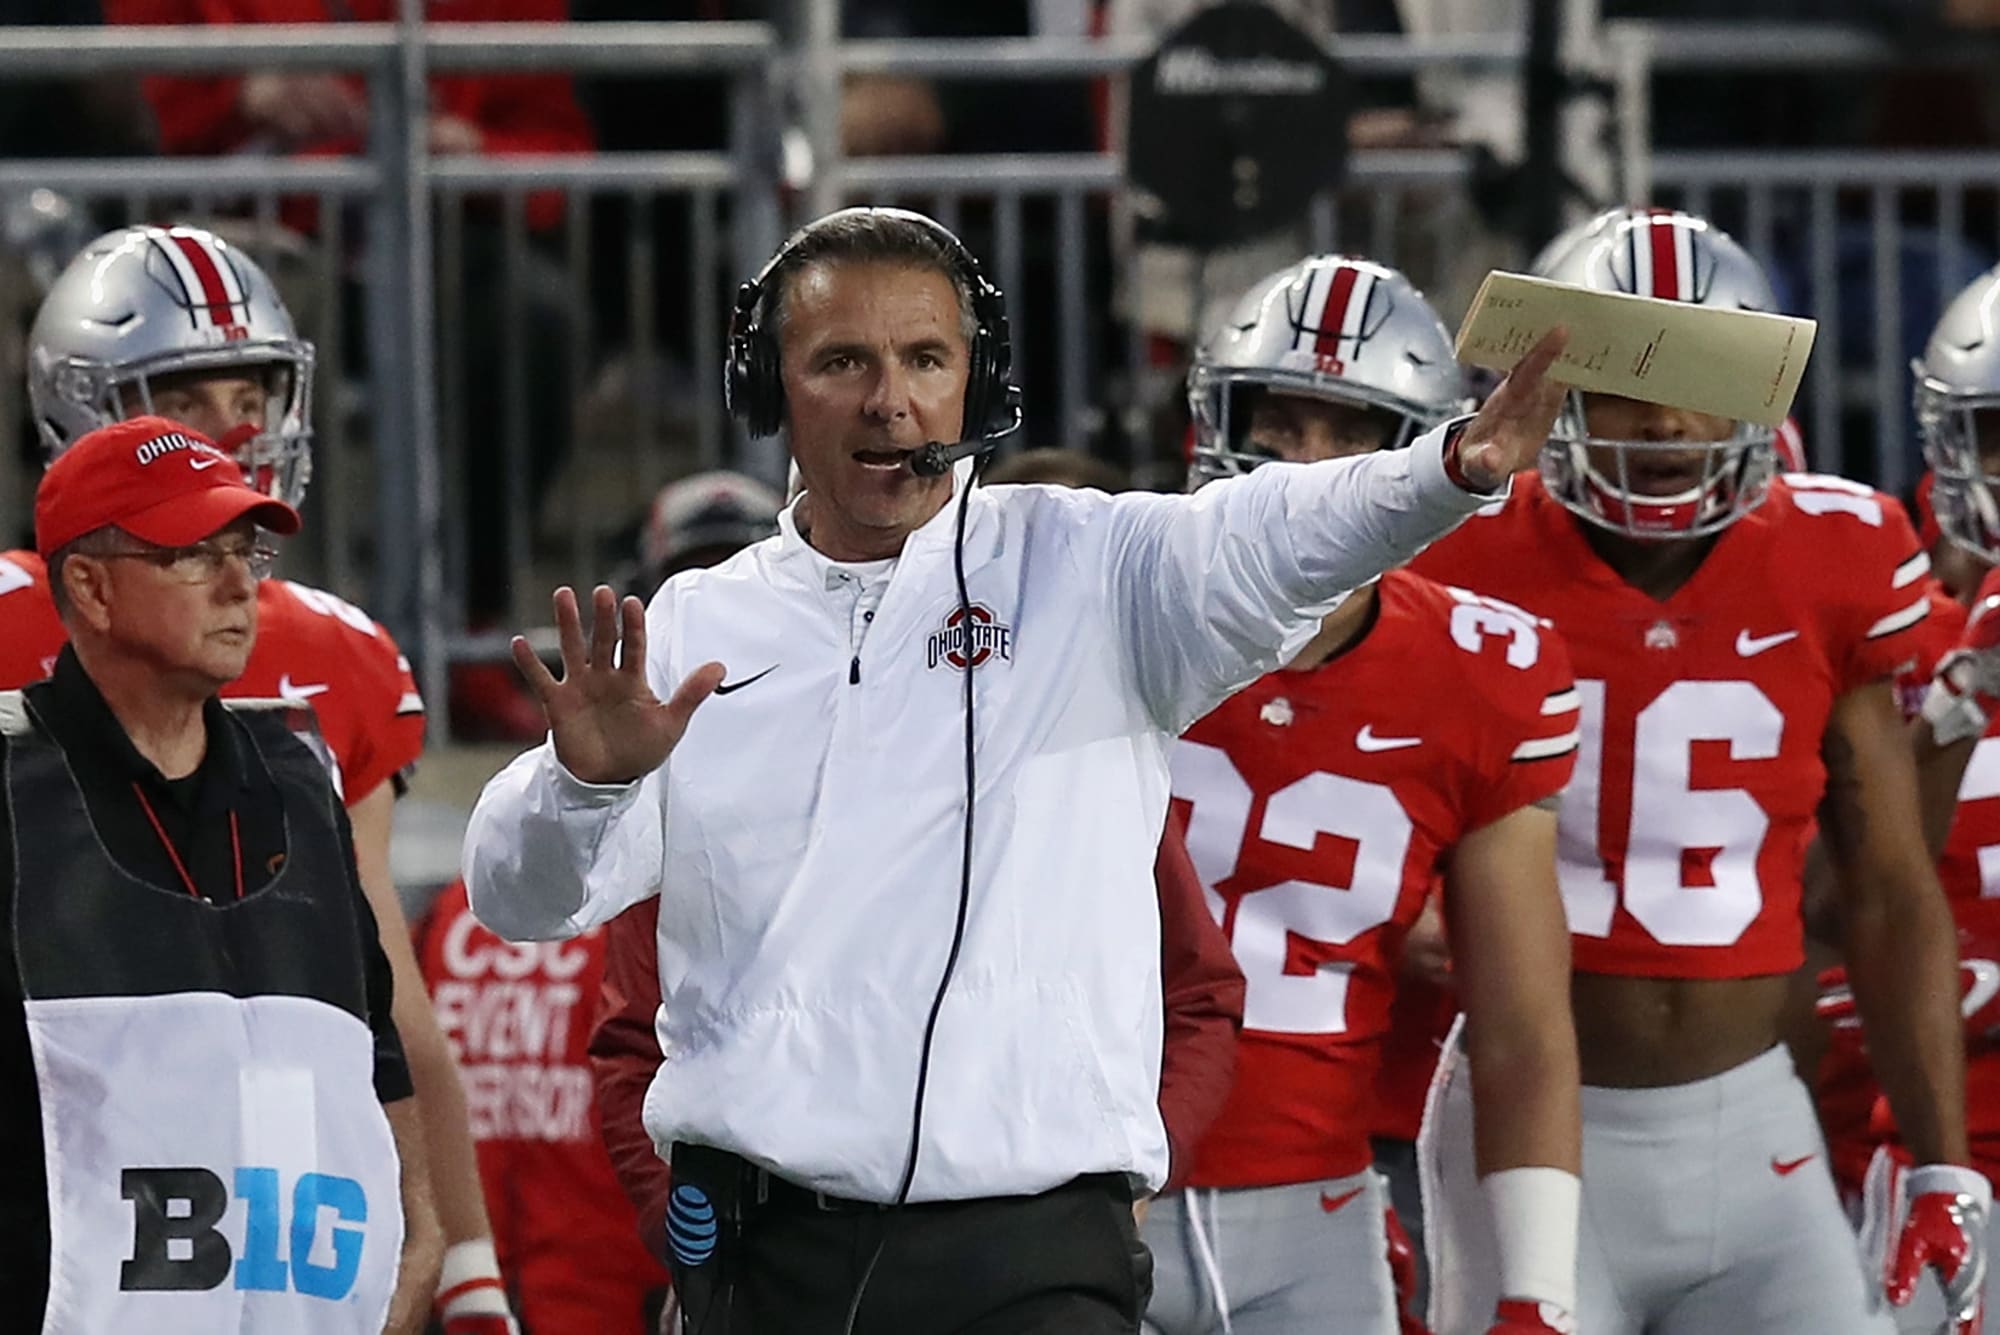 Ohio State Football: Top 10 coaches in program history